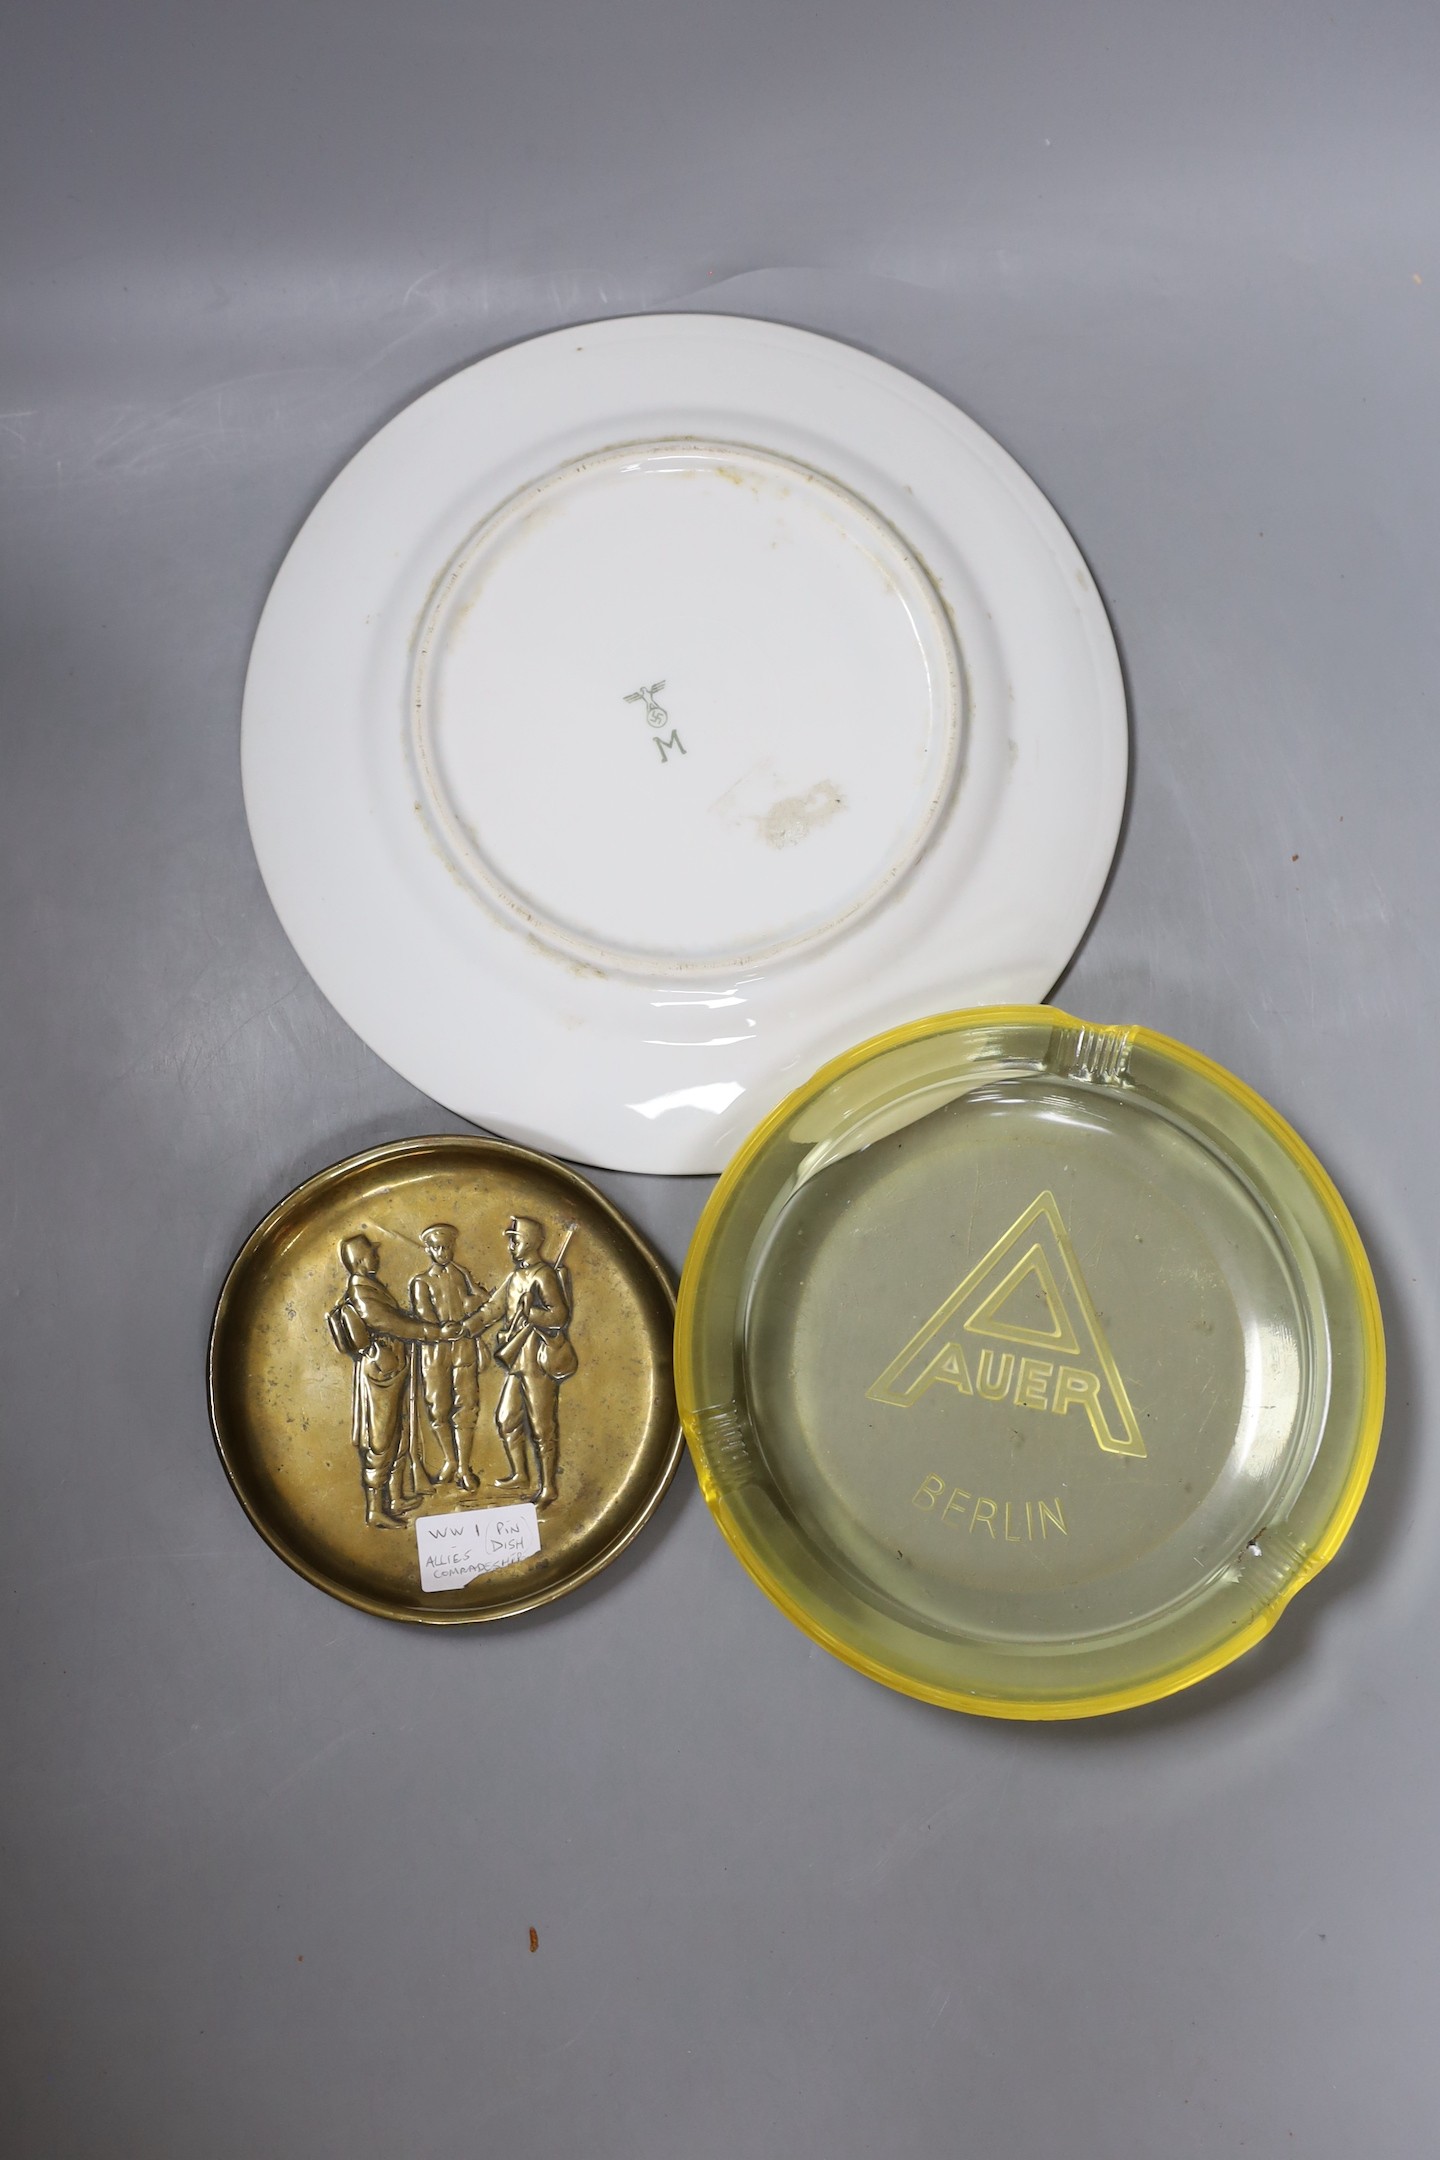 A WWII German Mess Hall porcelain plate, an Auer Berlin yellow glass ash tray and a WWI trench art